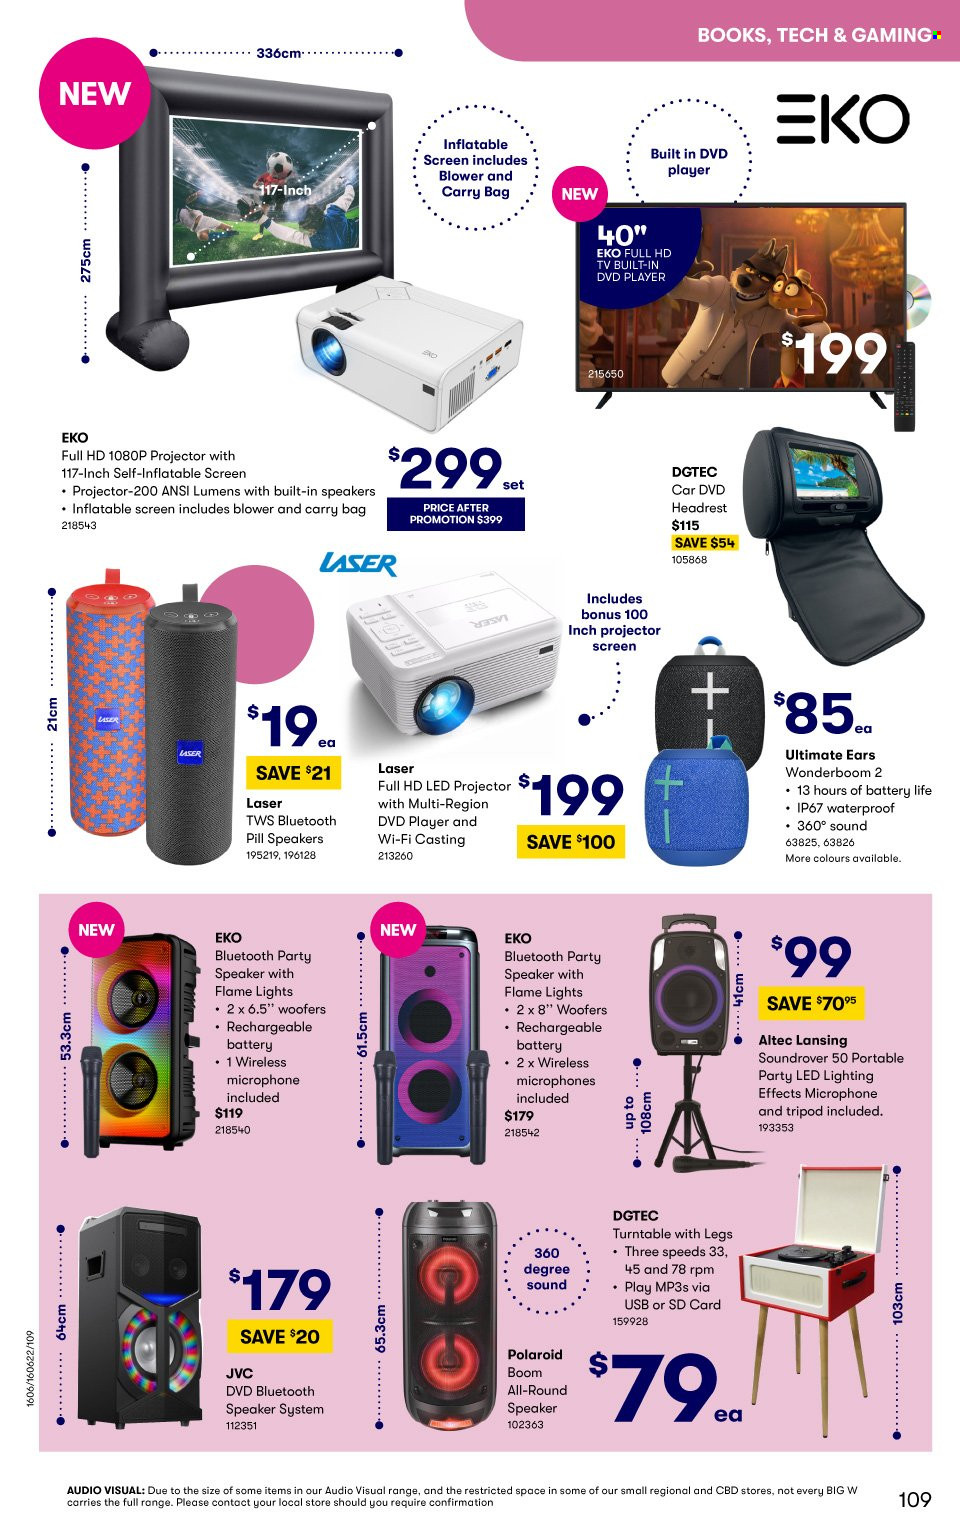 thumbnail - BIG W Catalogue - Sales products - rechargeable battery, book, memory card, Ultimate Ears, Polaroid, JVC, tripod, HDTV, Full HD TV, TV, Altec Lansing, dvd player, projector, projector screen, speaker, bluetooth speaker, microphone, lighting. Page 109.